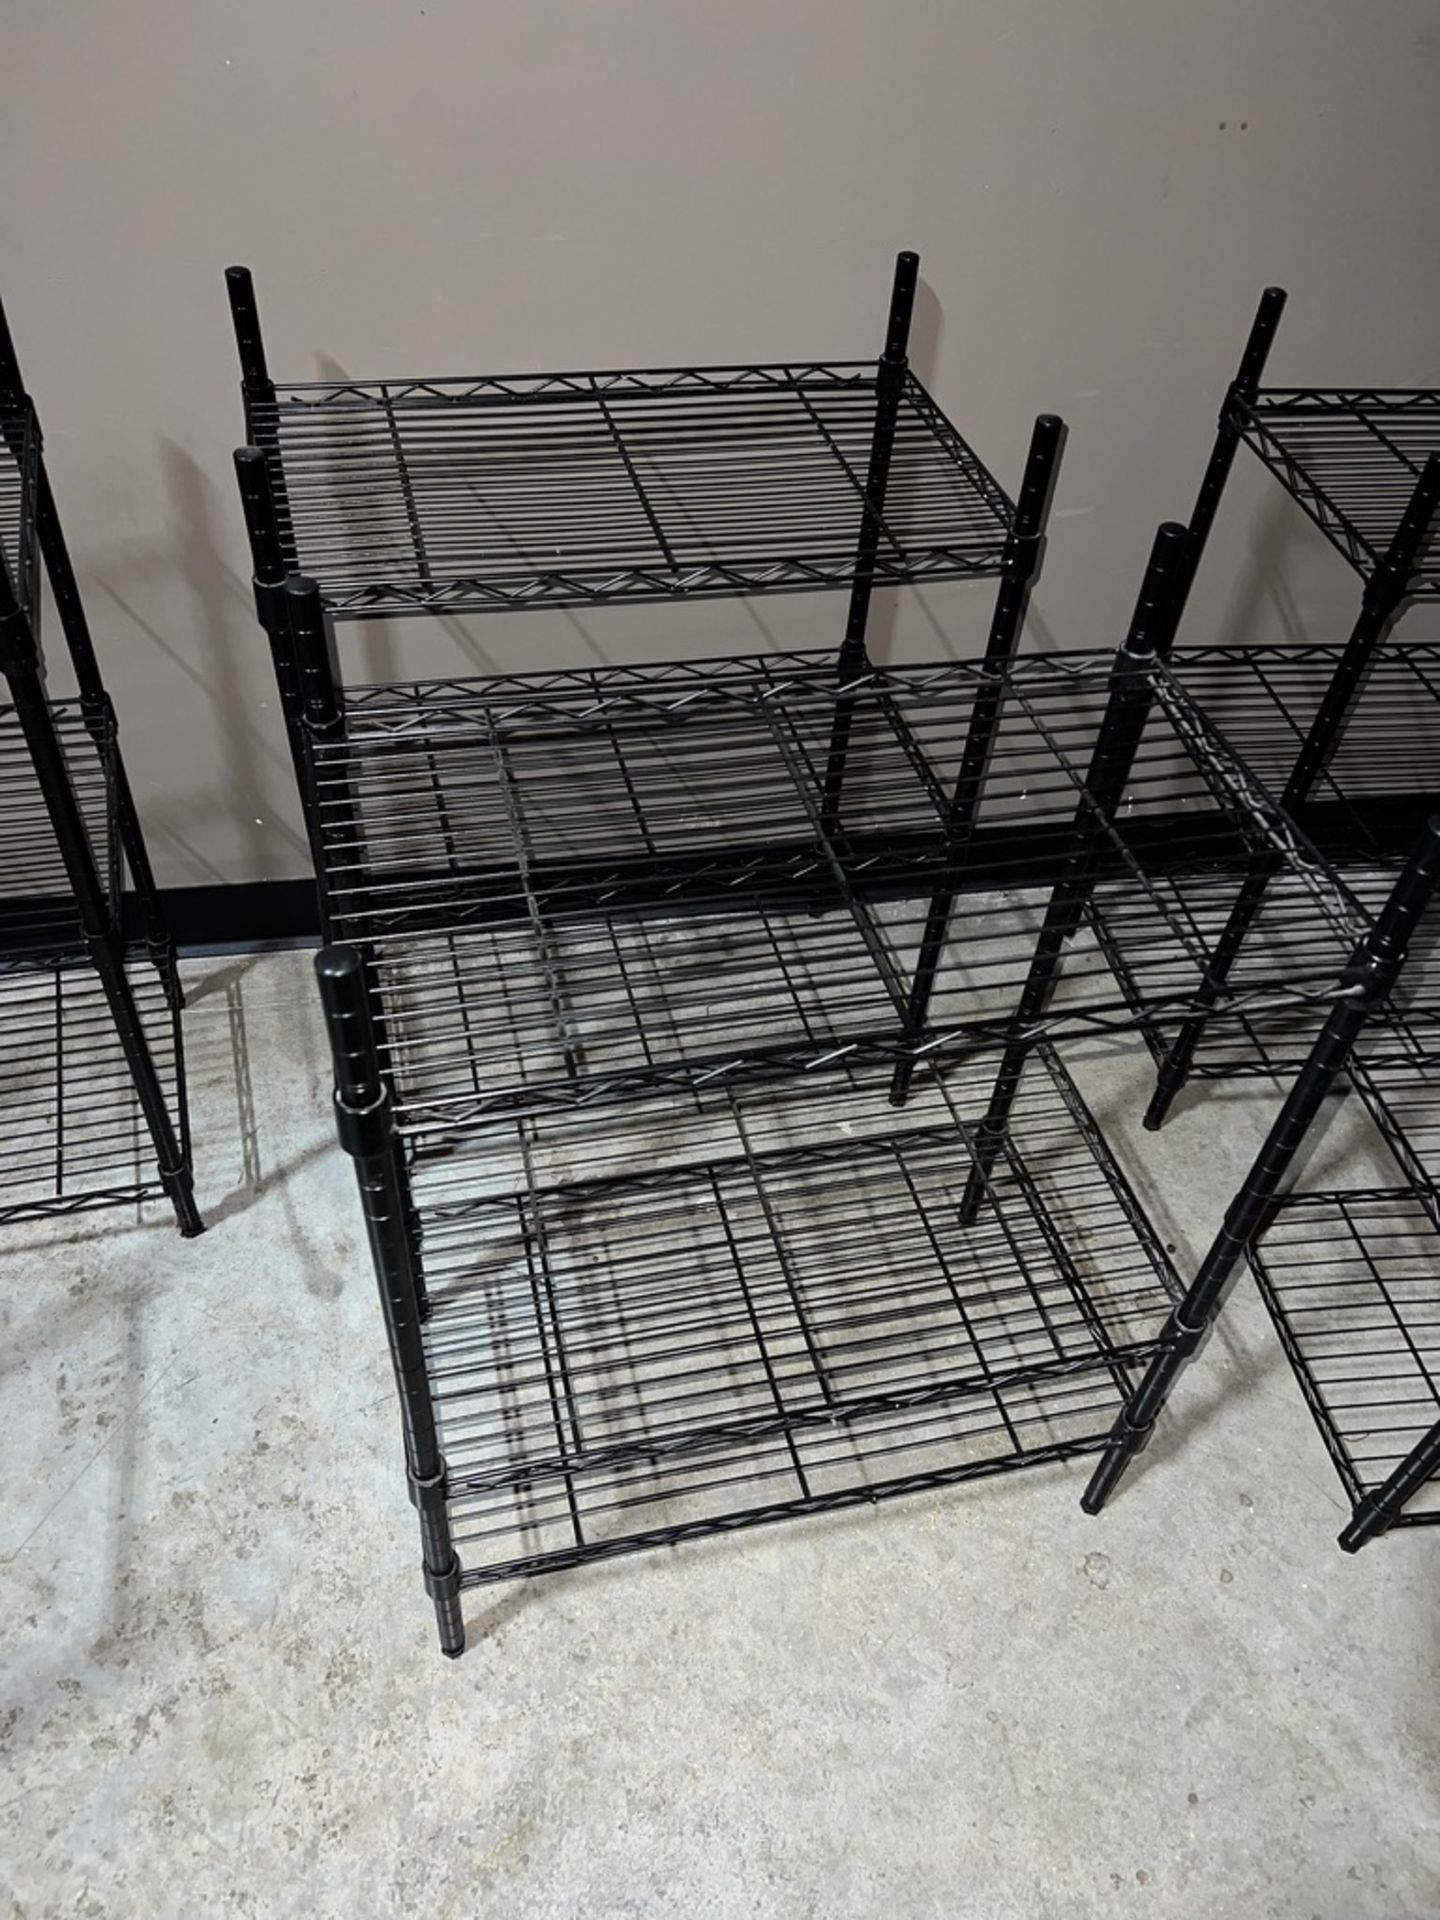 LOT OF: (2) 3-TIER WIRE SHELVING UNITS APPROXIMTELY 24" WIDE - Image 3 of 3